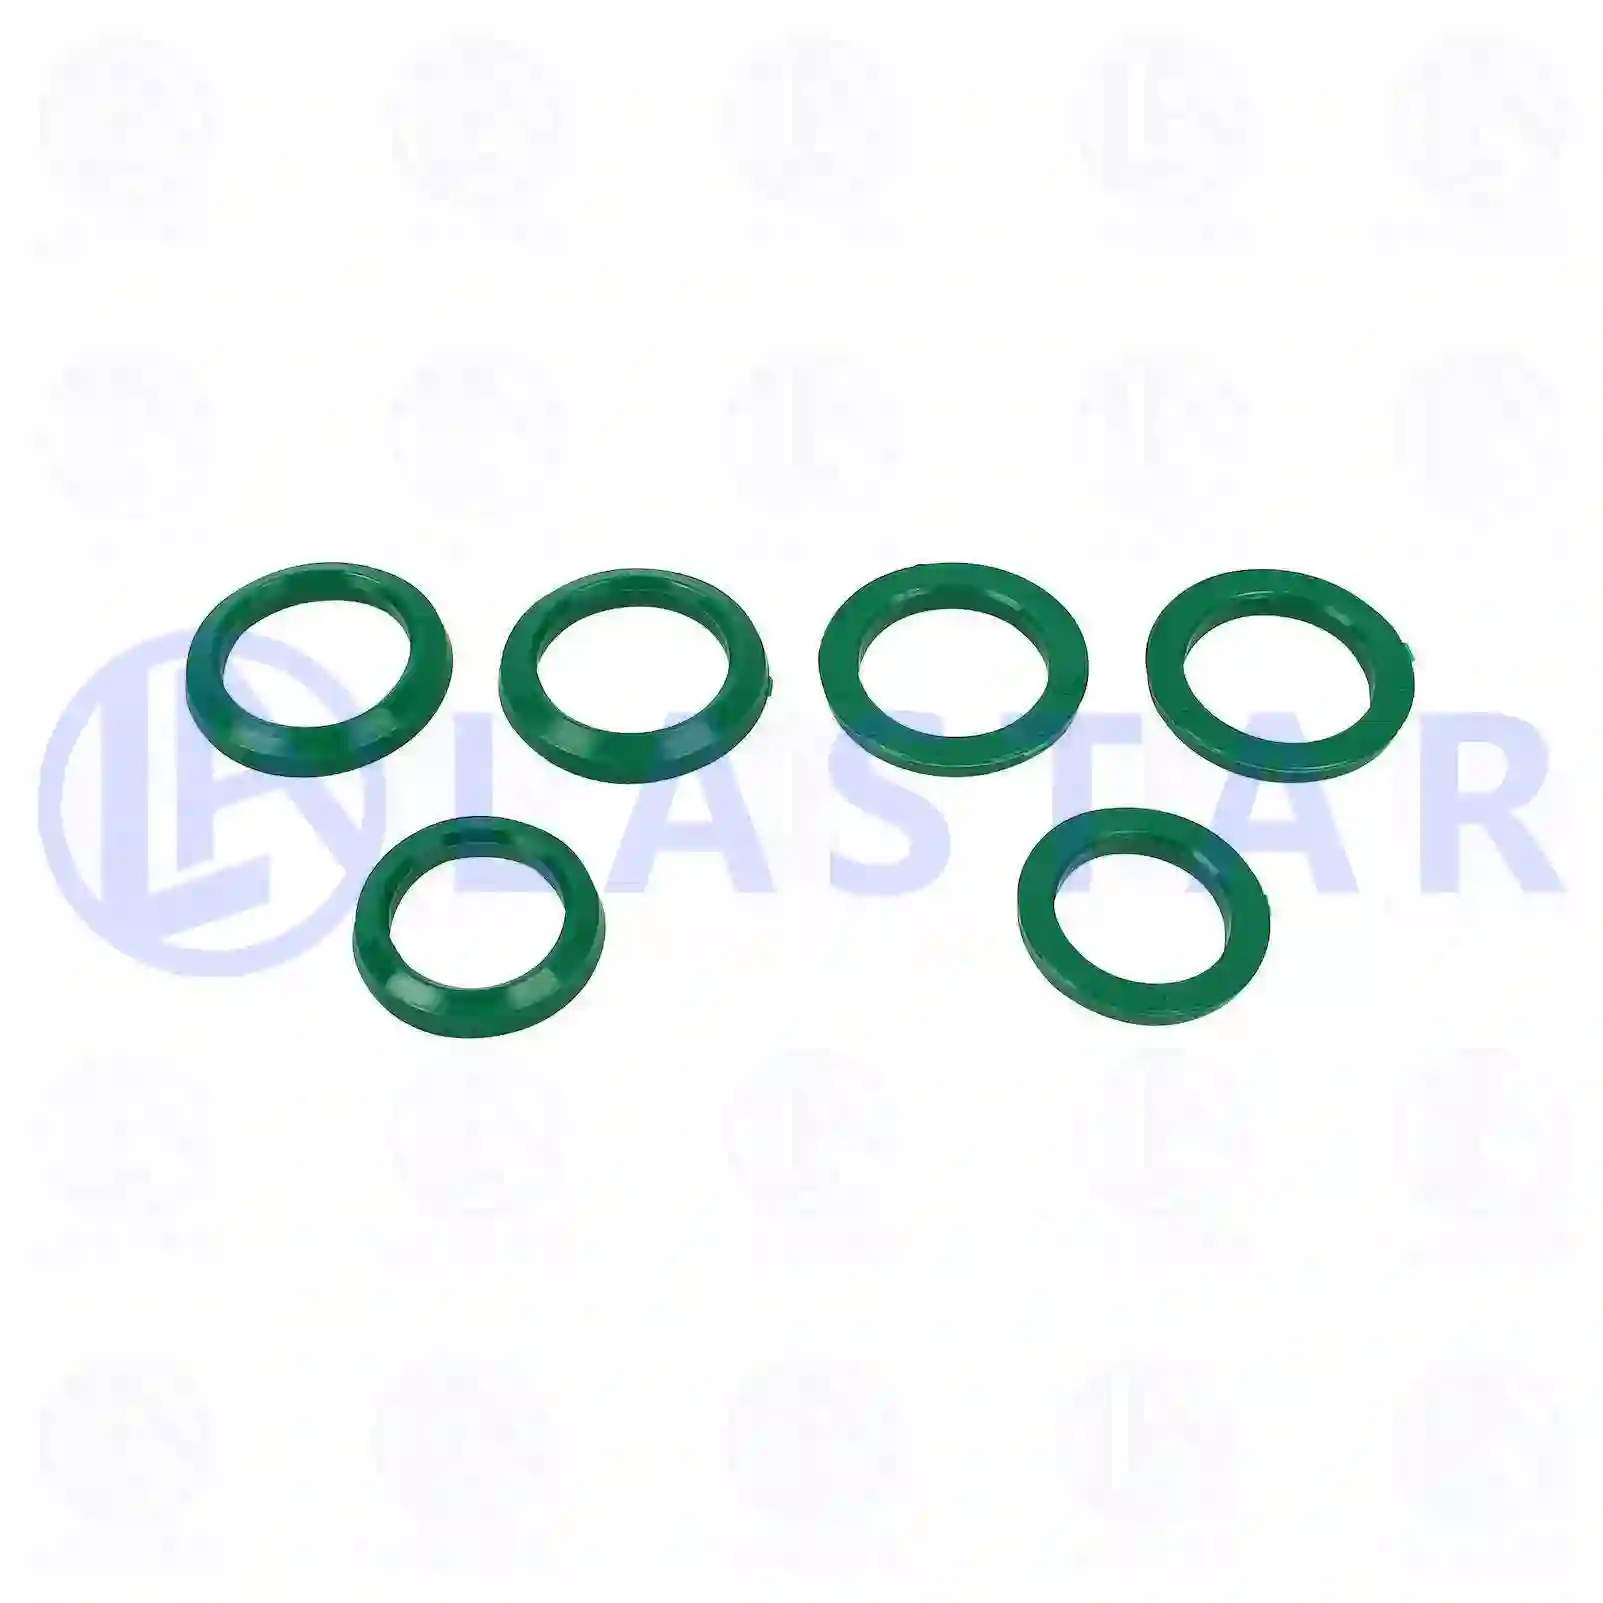 Repair kit, hydraulic cylinder, 77735906, 20995564 ||  77735906 Lastar Spare Part | Truck Spare Parts, Auotomotive Spare Parts Repair kit, hydraulic cylinder, 77735906, 20995564 ||  77735906 Lastar Spare Part | Truck Spare Parts, Auotomotive Spare Parts